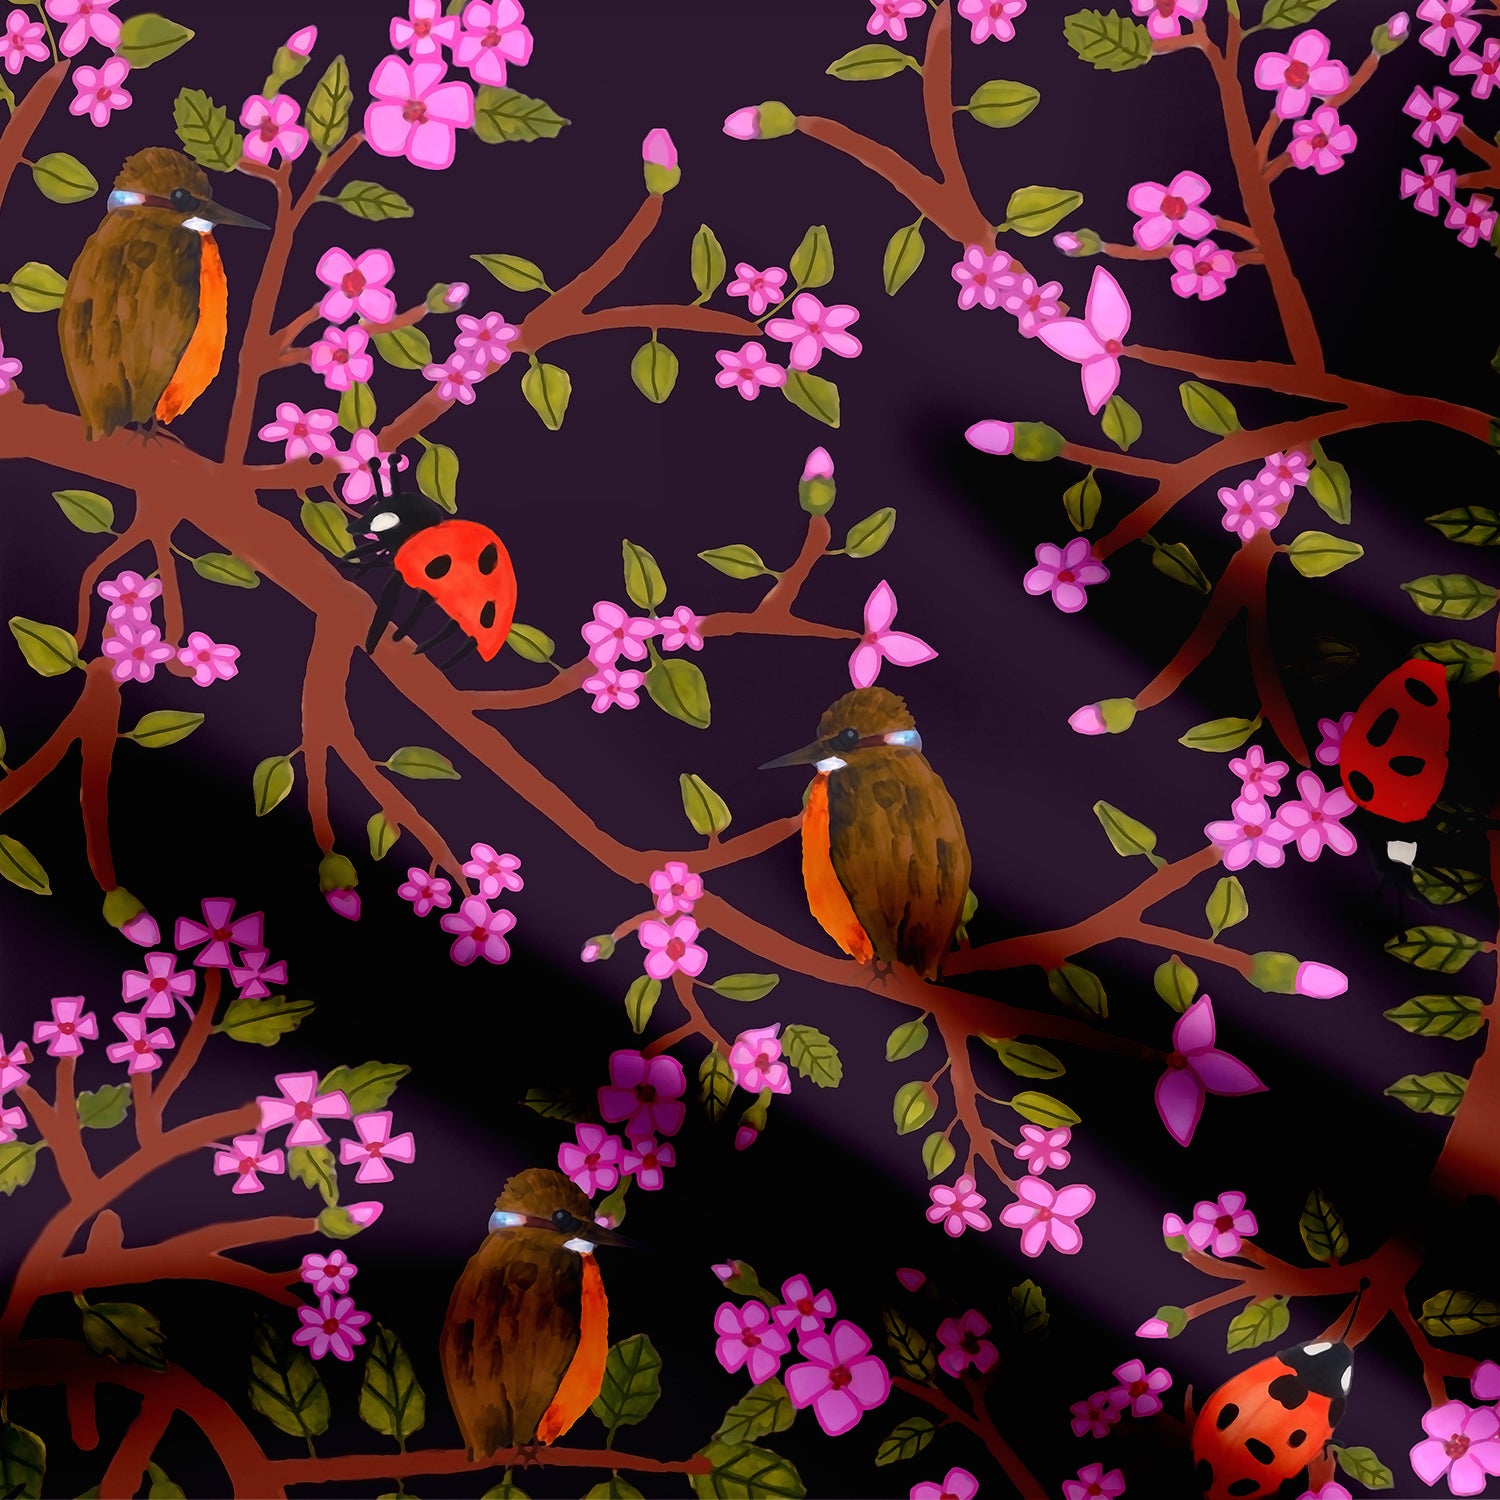 Floral print with birds and insect motifs- 2